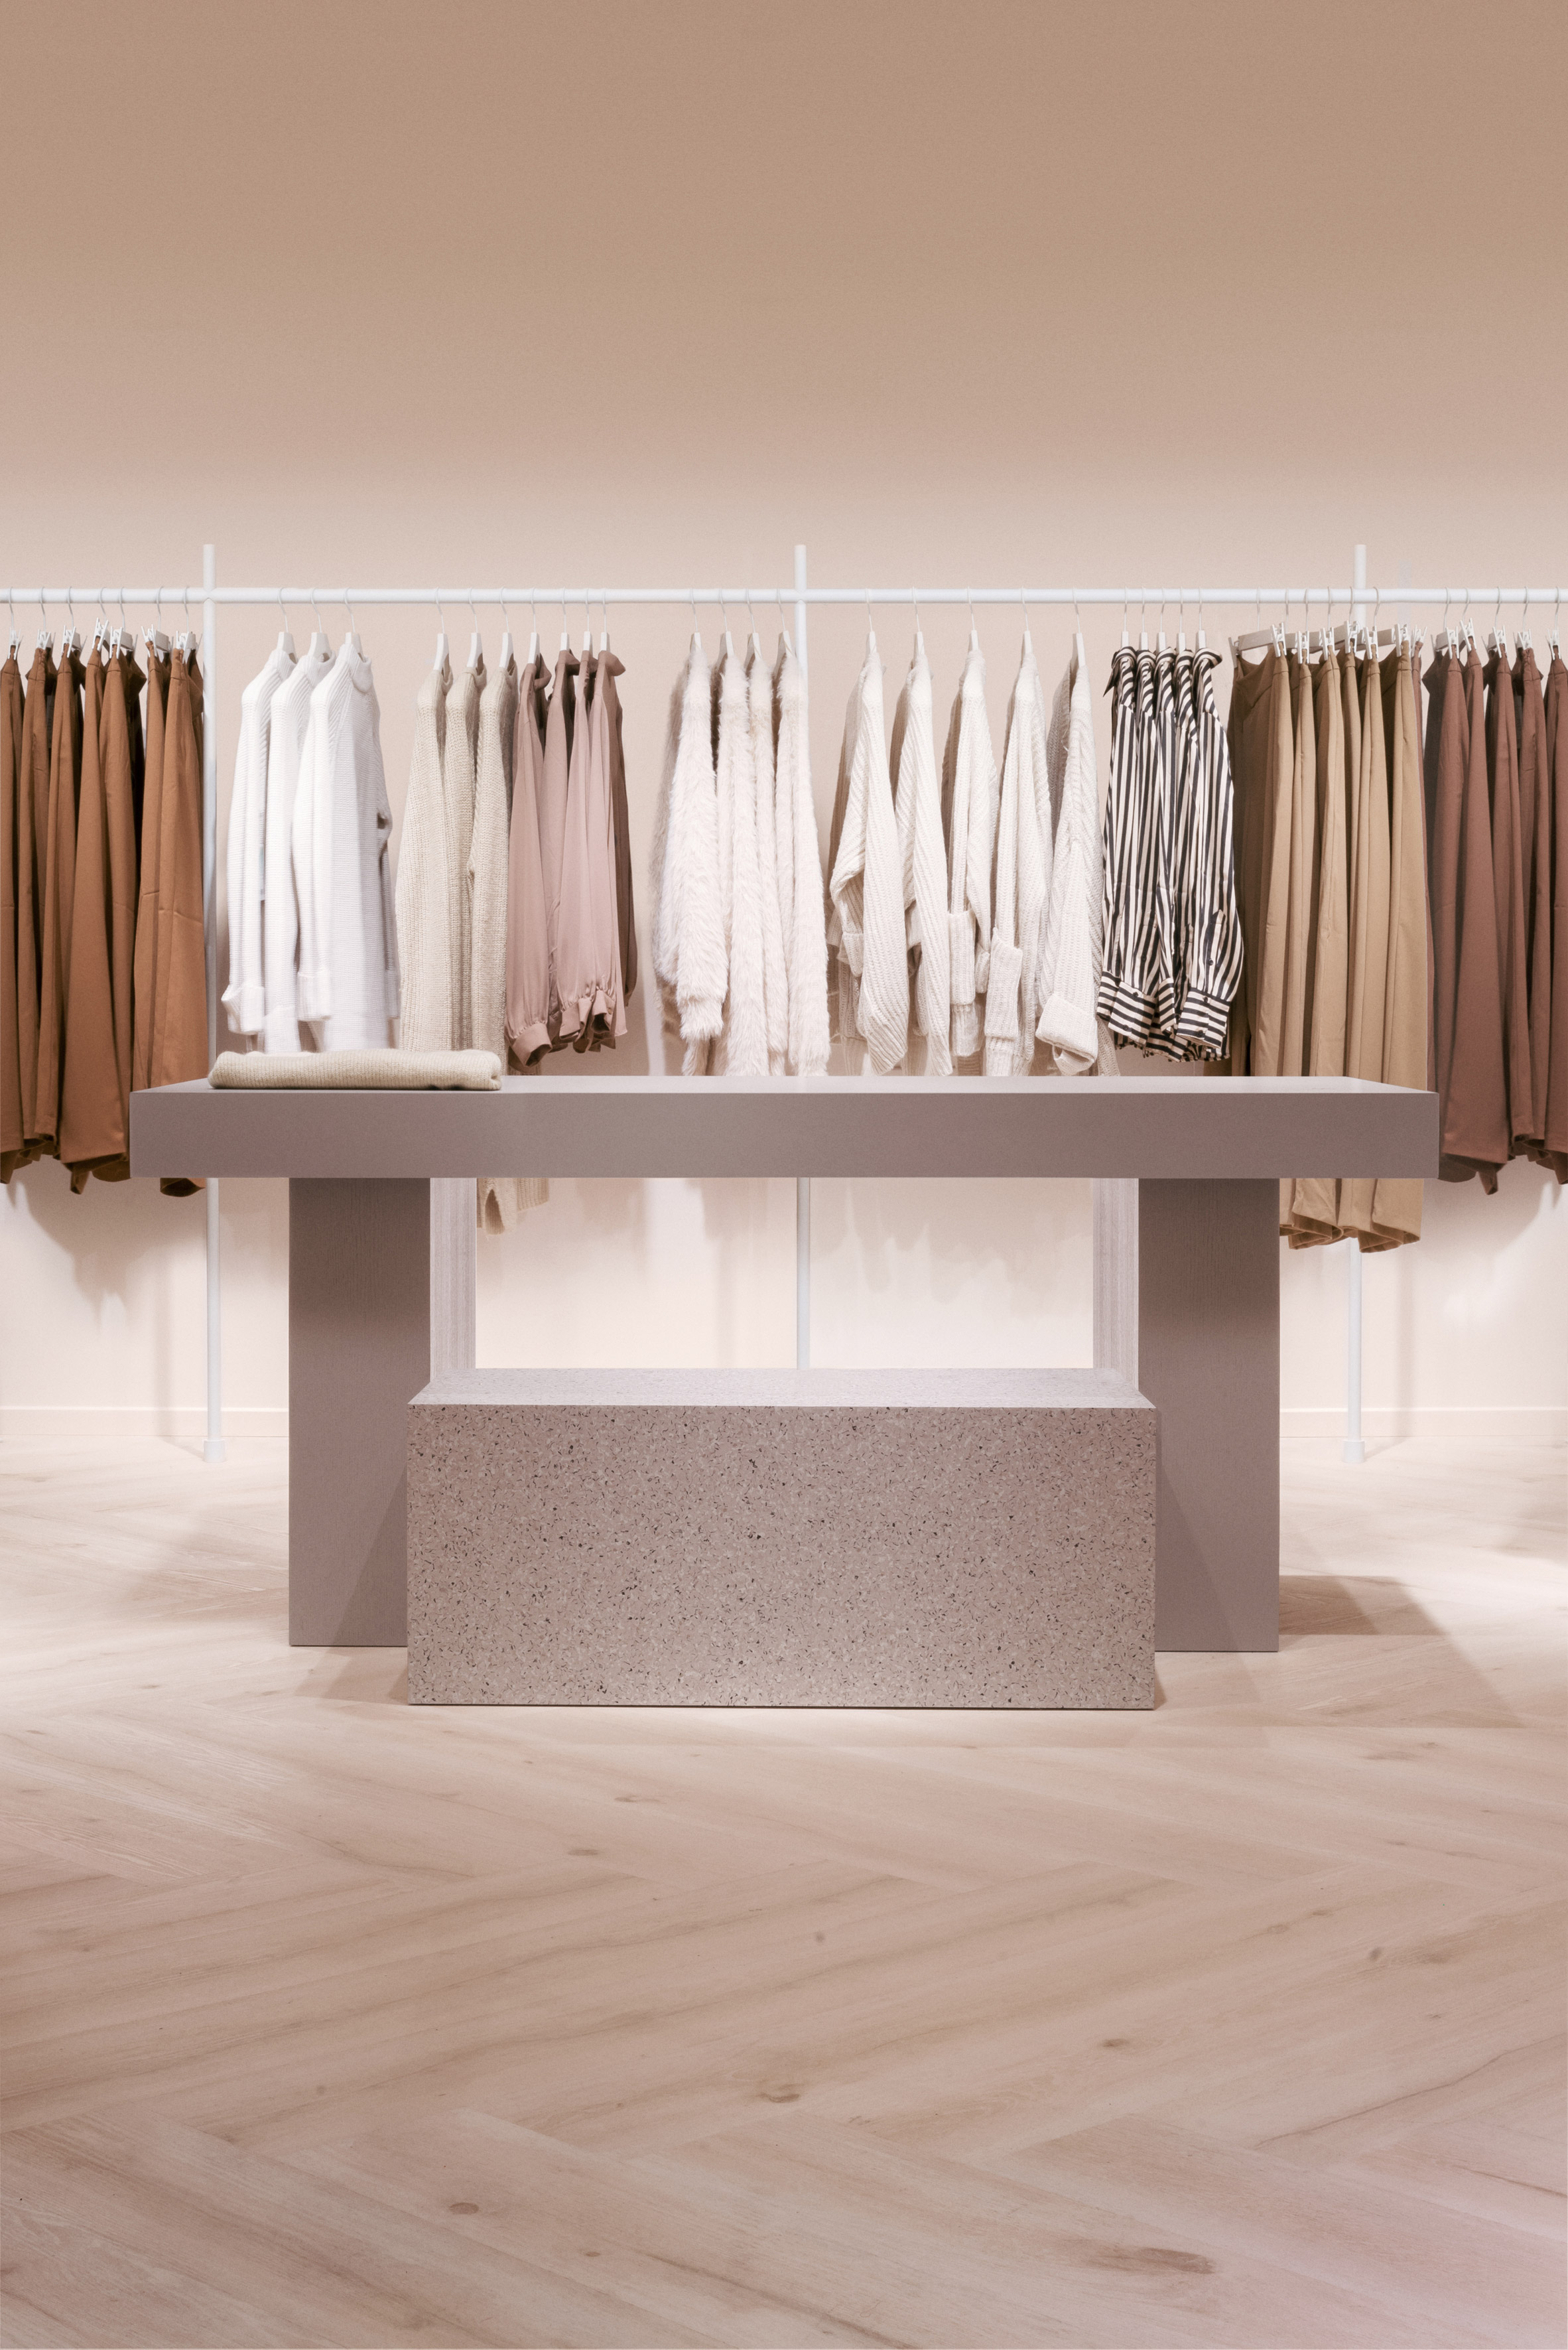 The Gina Tricot store mixes materials for its Stockholm branch